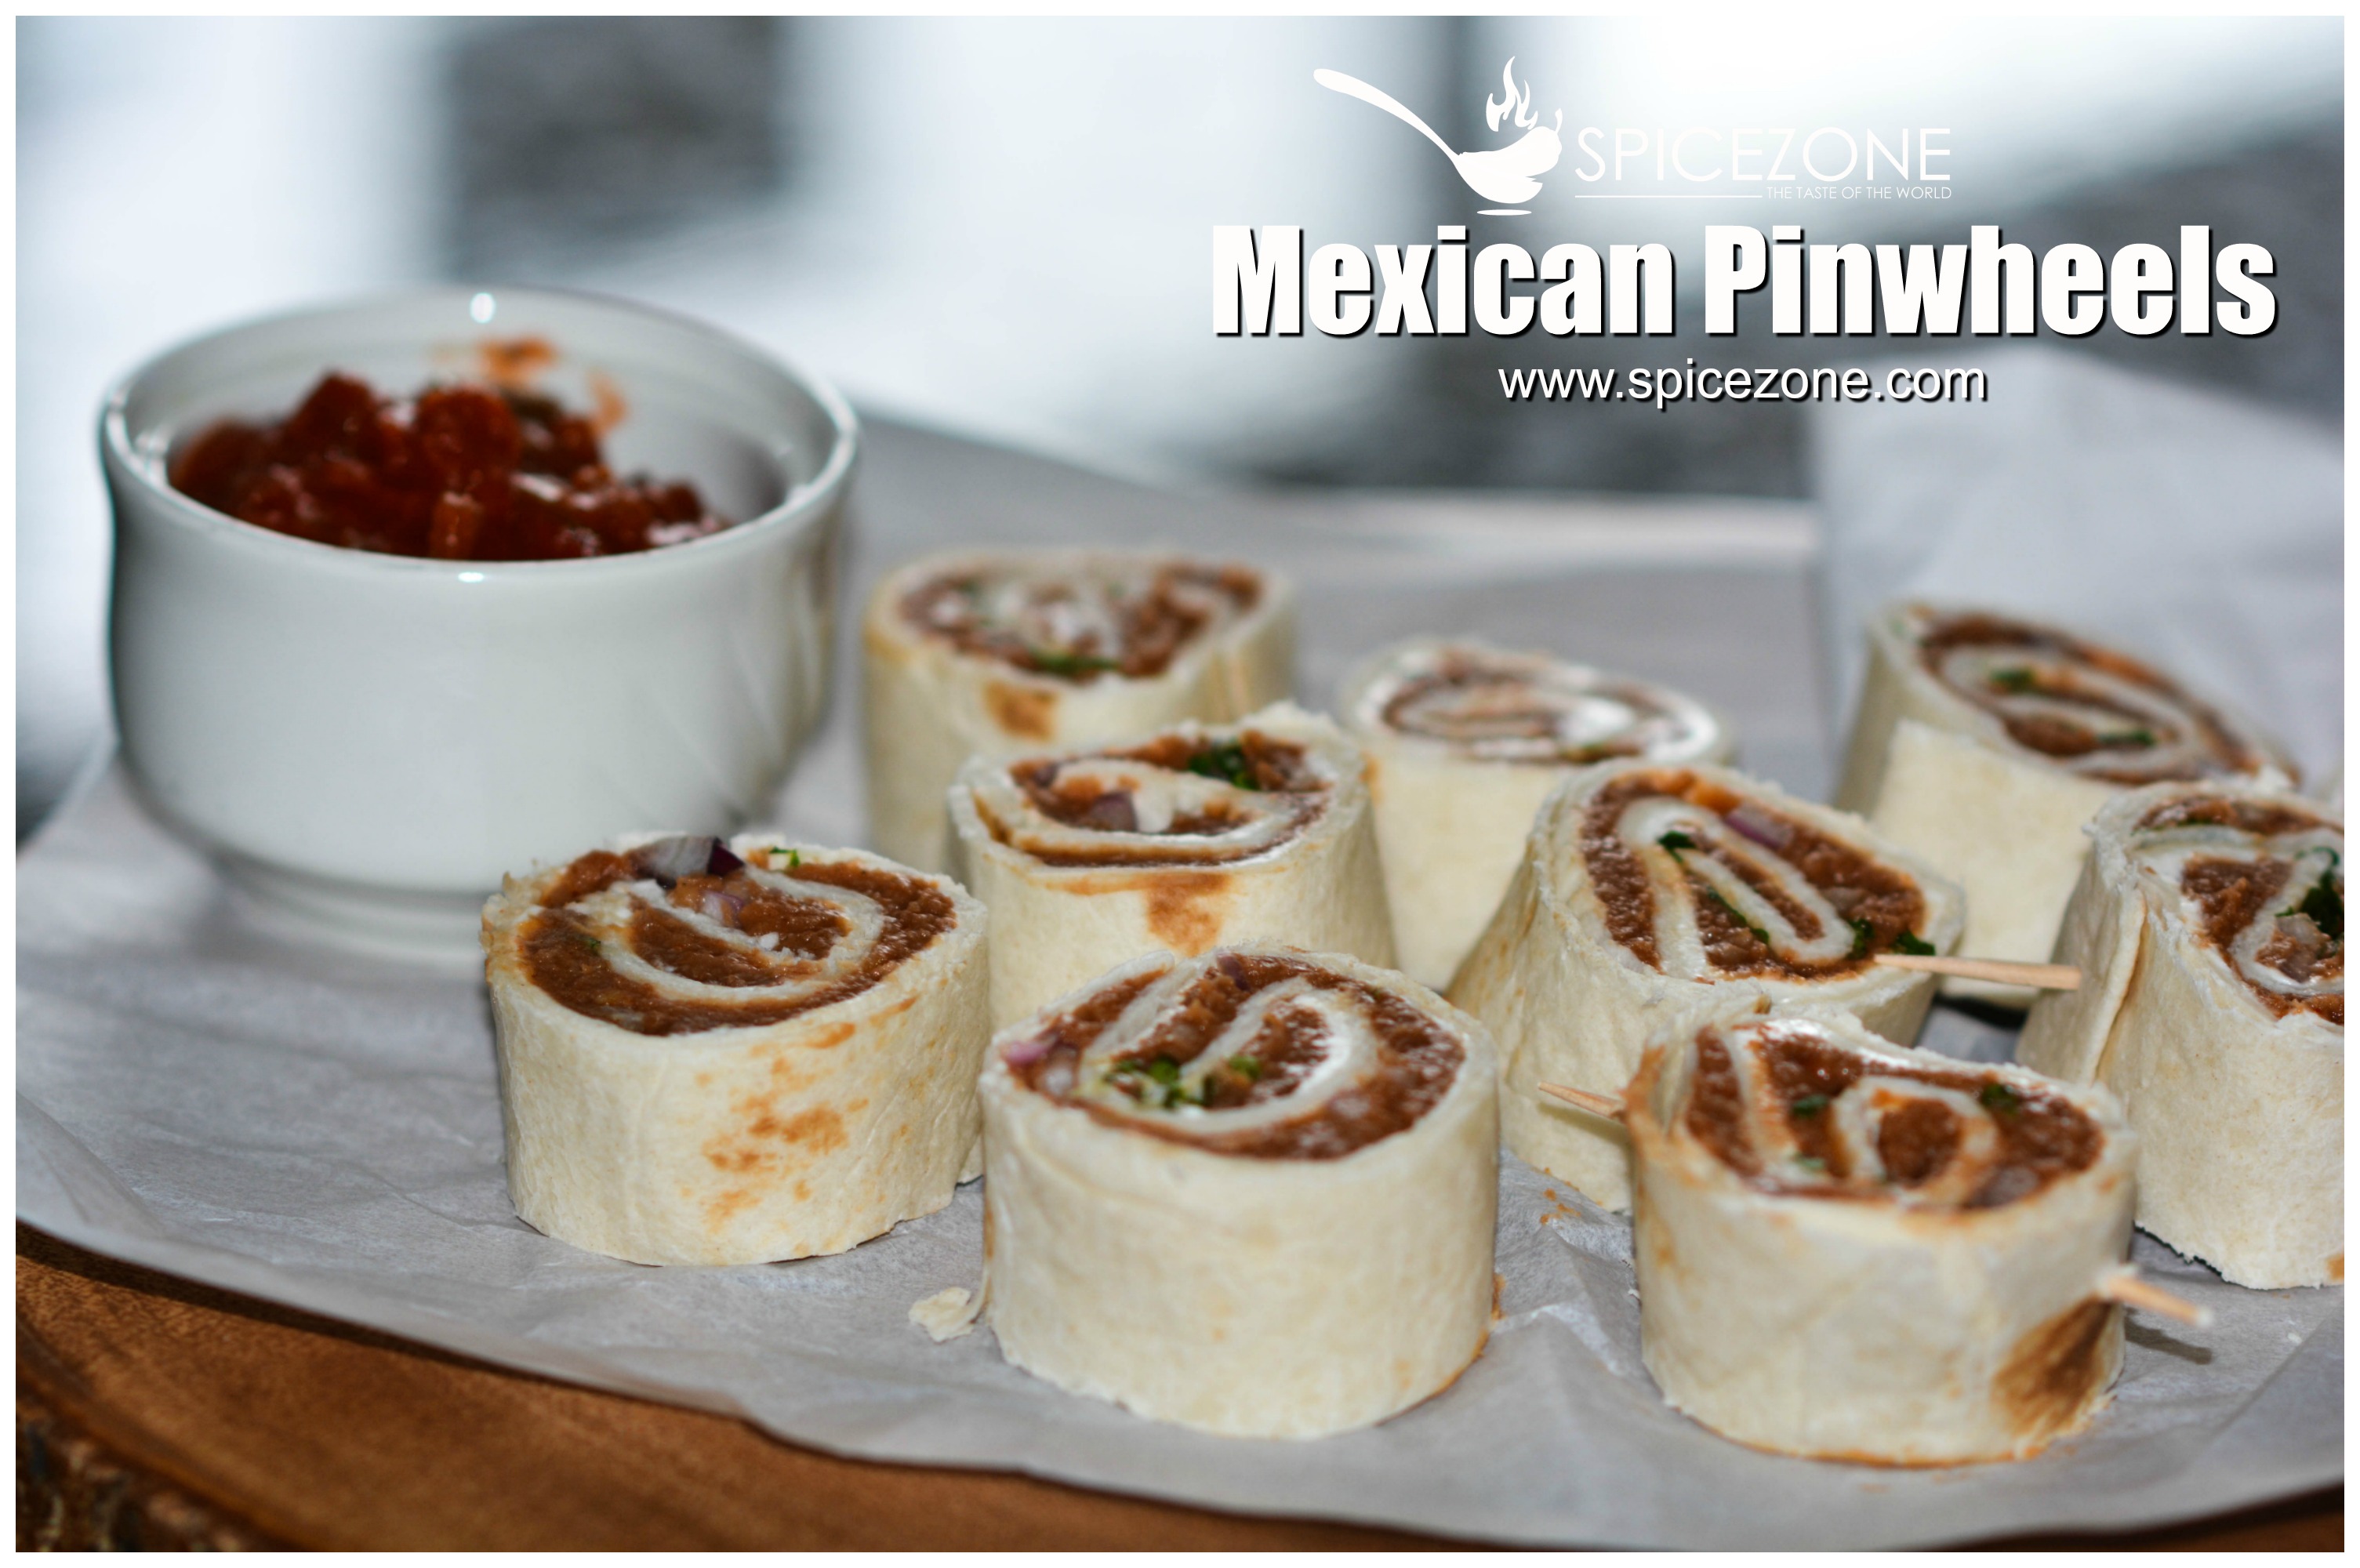 Mexican Pinwheels - Spice Zone